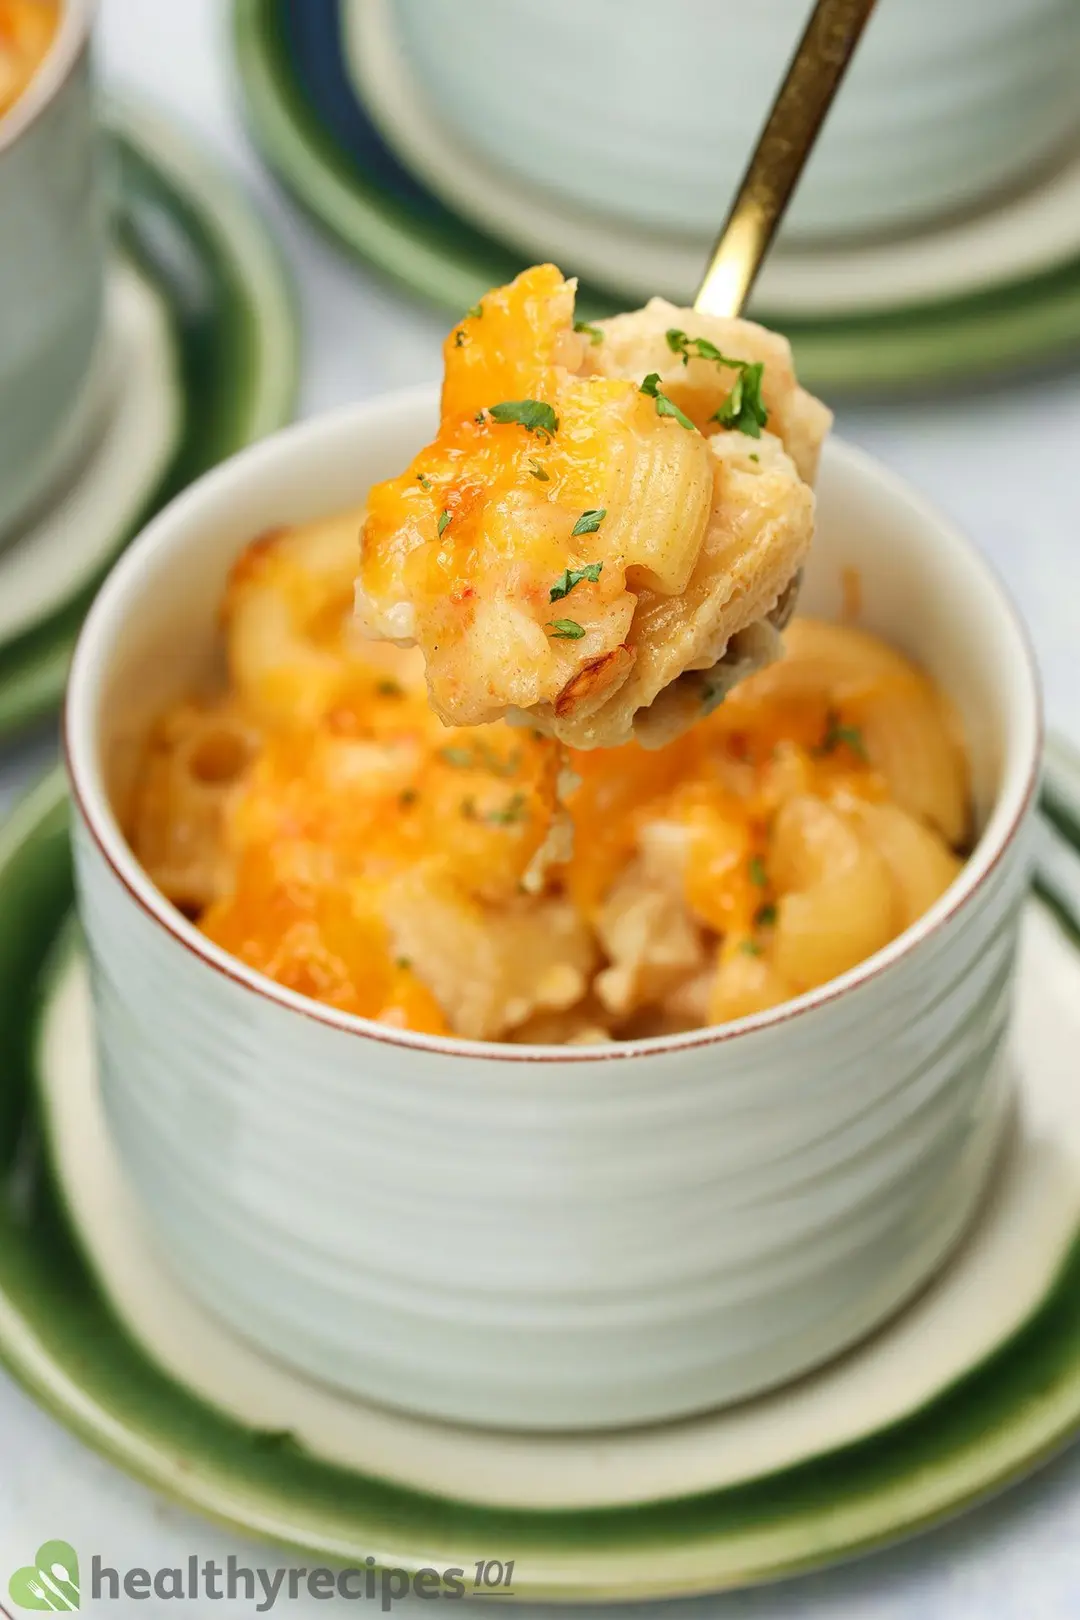 Shrimp Mac and Cheese a Nutritious Comfort Food